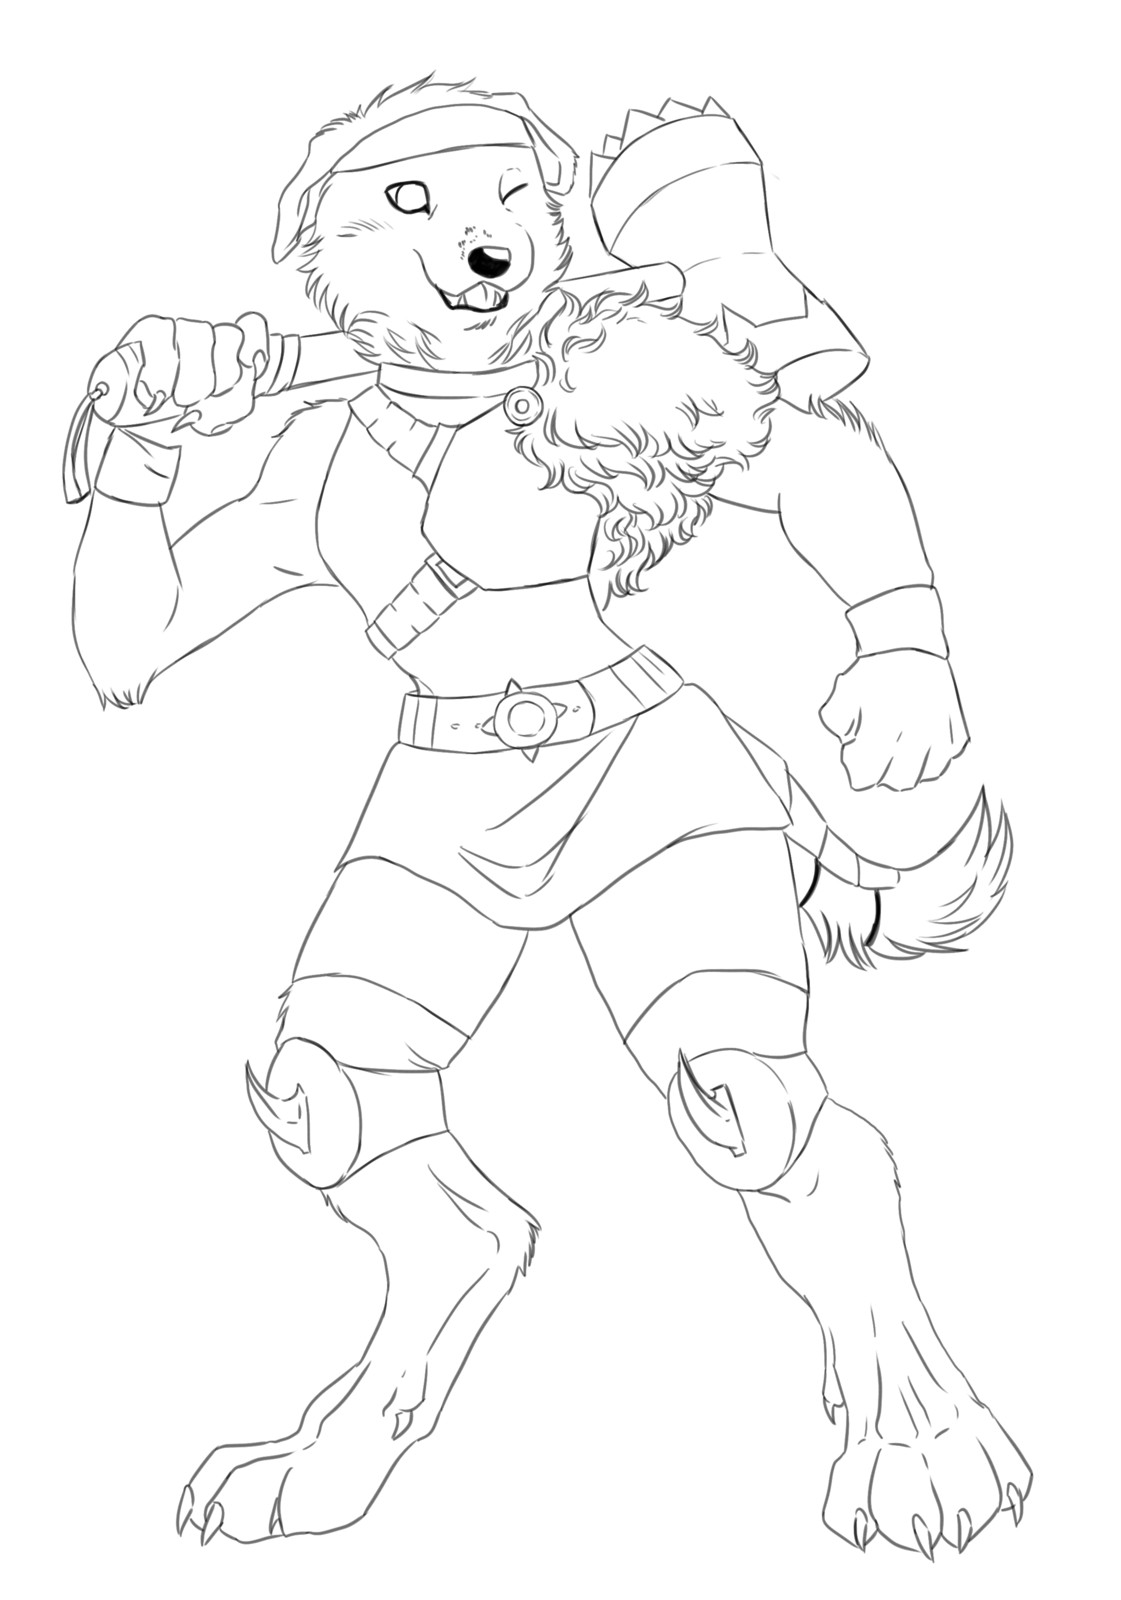 Frontal view of the character (lineart)